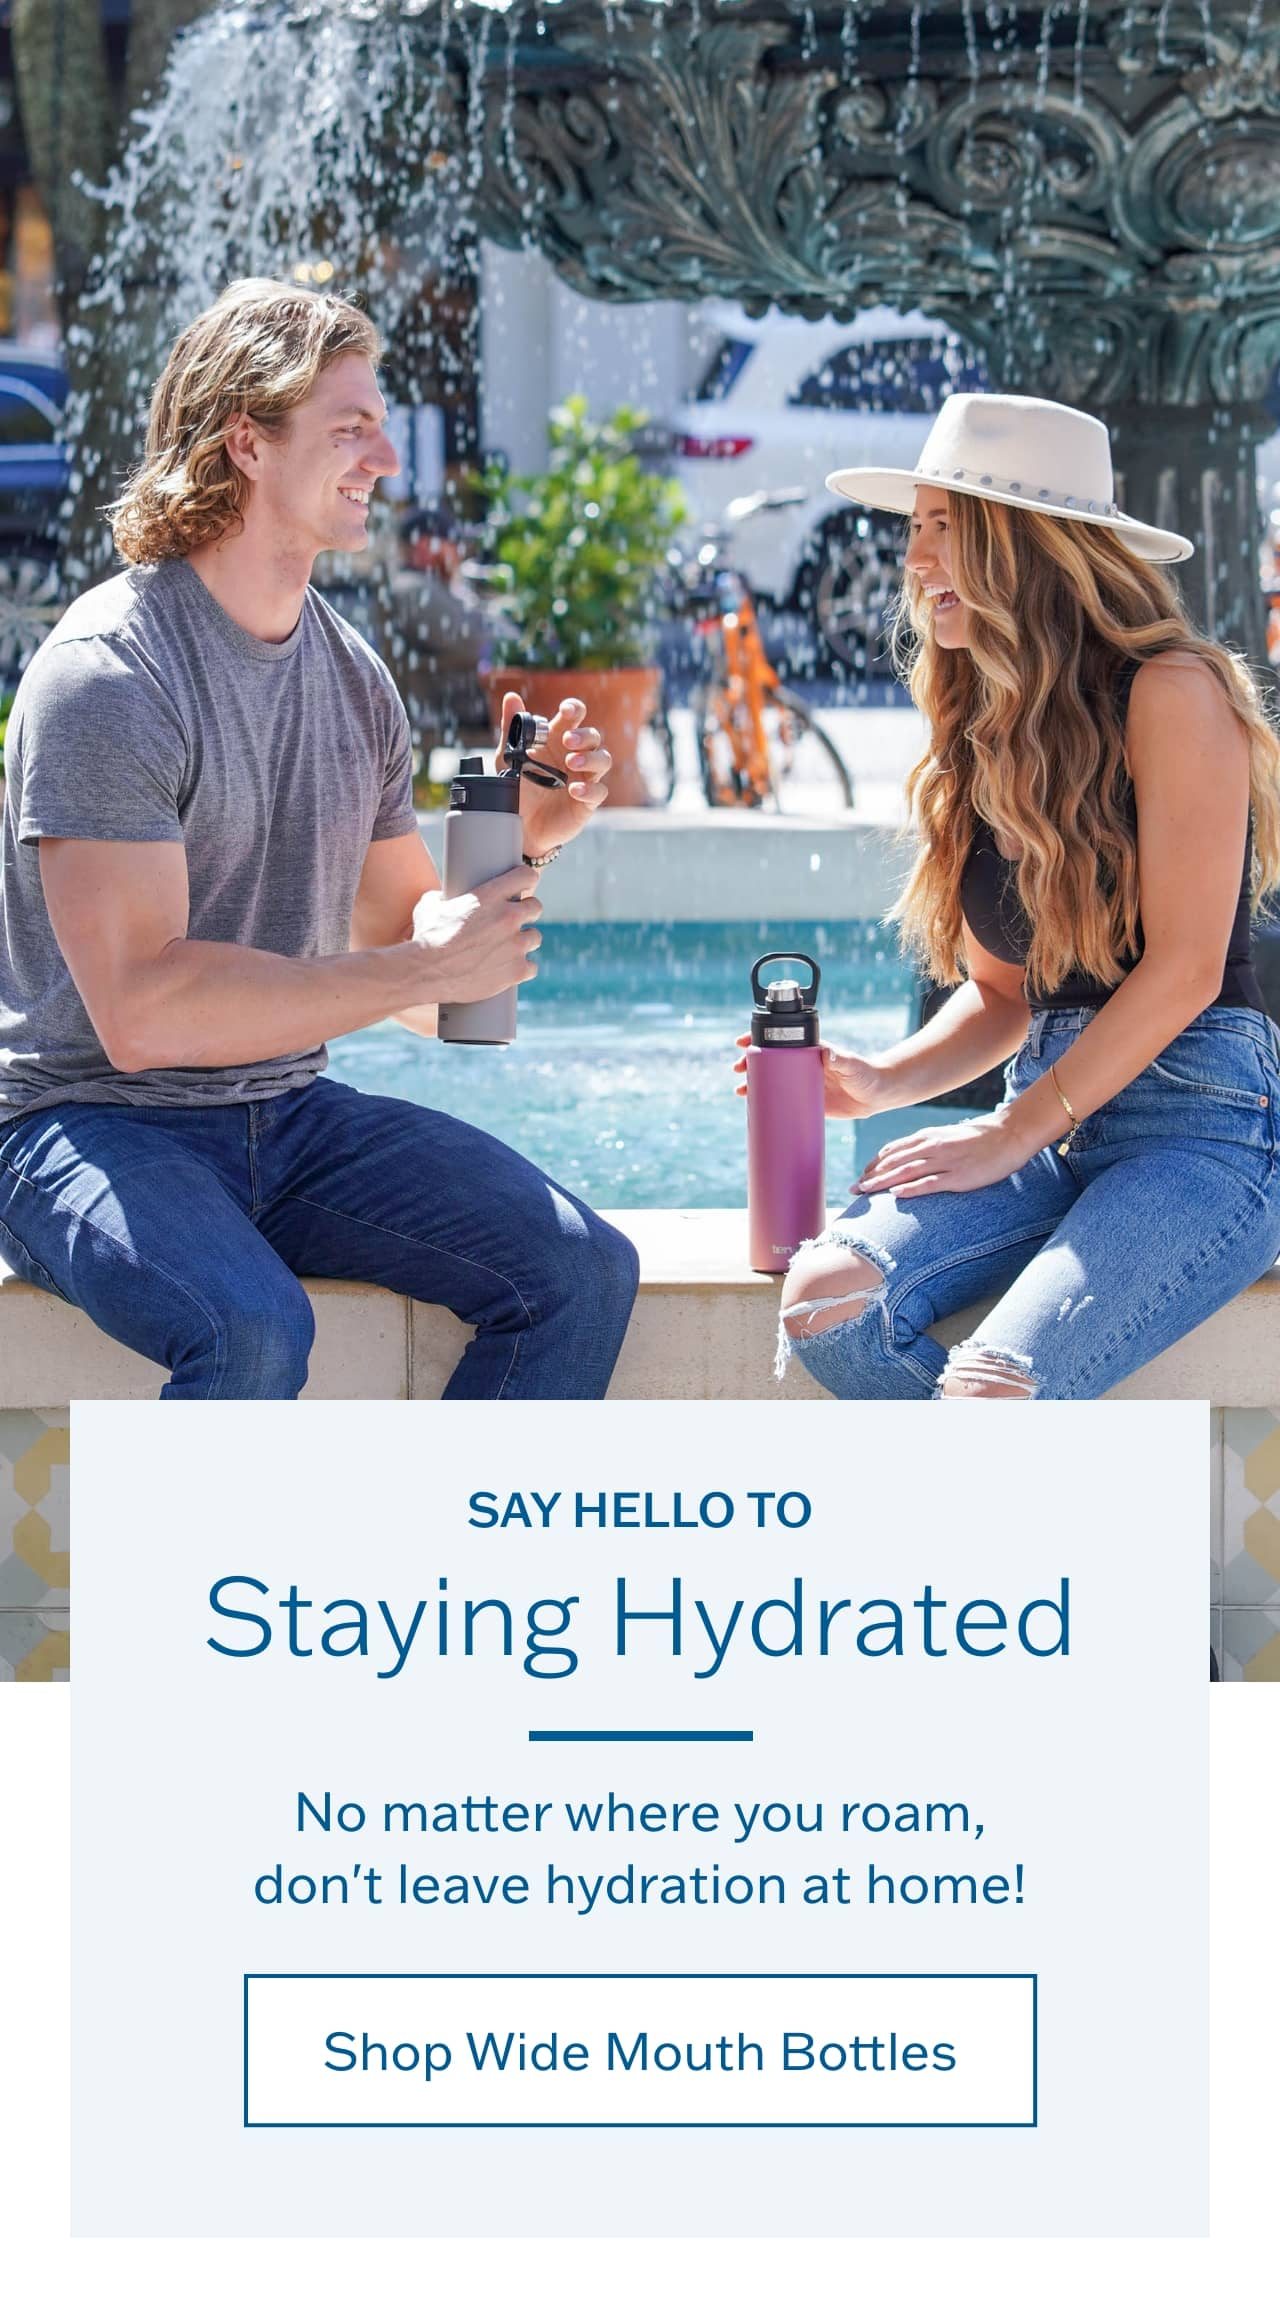 Say hello to staying hydrated. No matter where you roam, don't leave hydration at home! Shop Wide Mouth Bottles